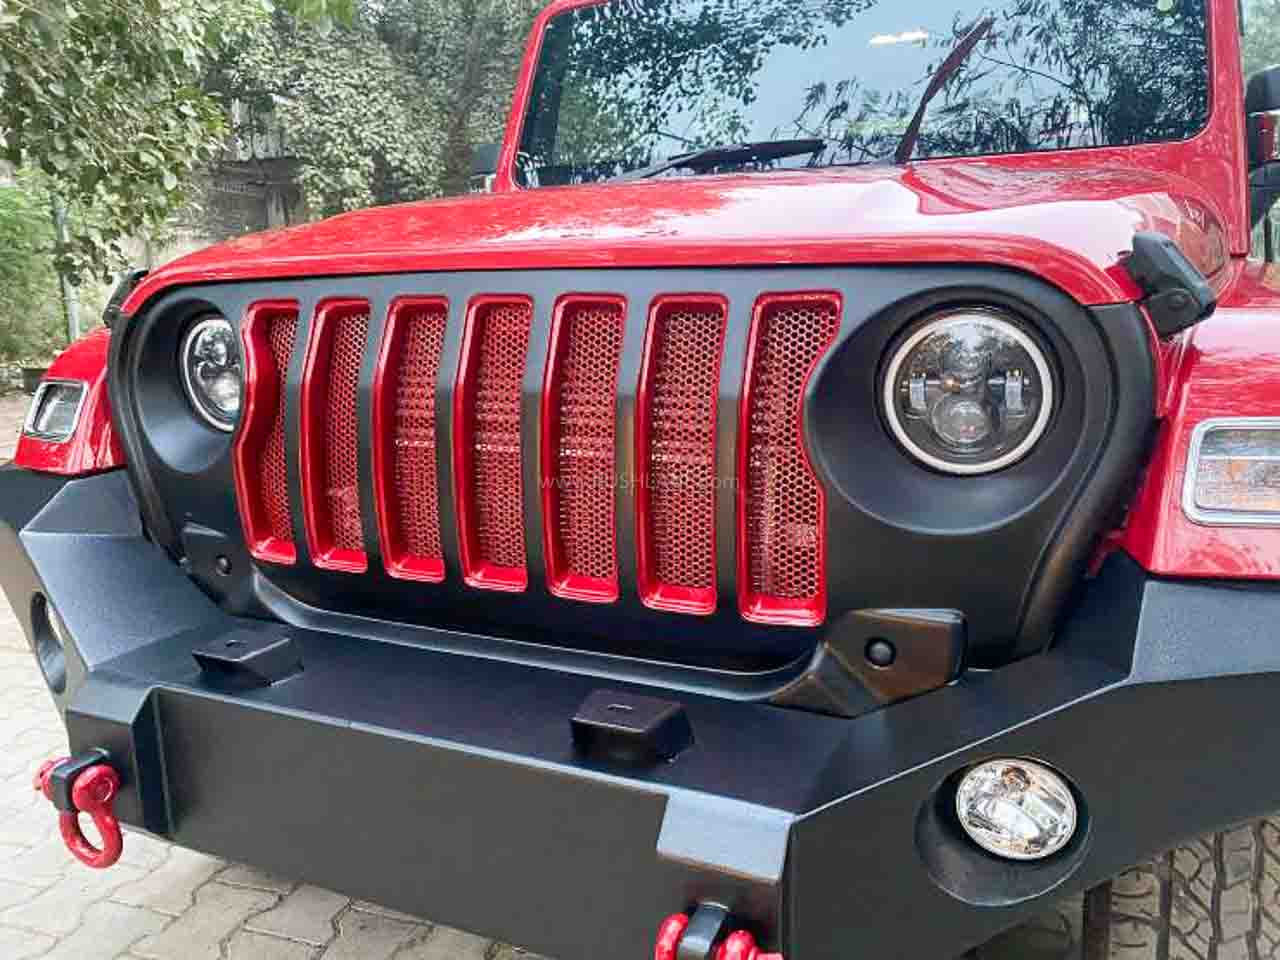 2020 Mahindra Thar Modified With Aftermarket Accessories ...